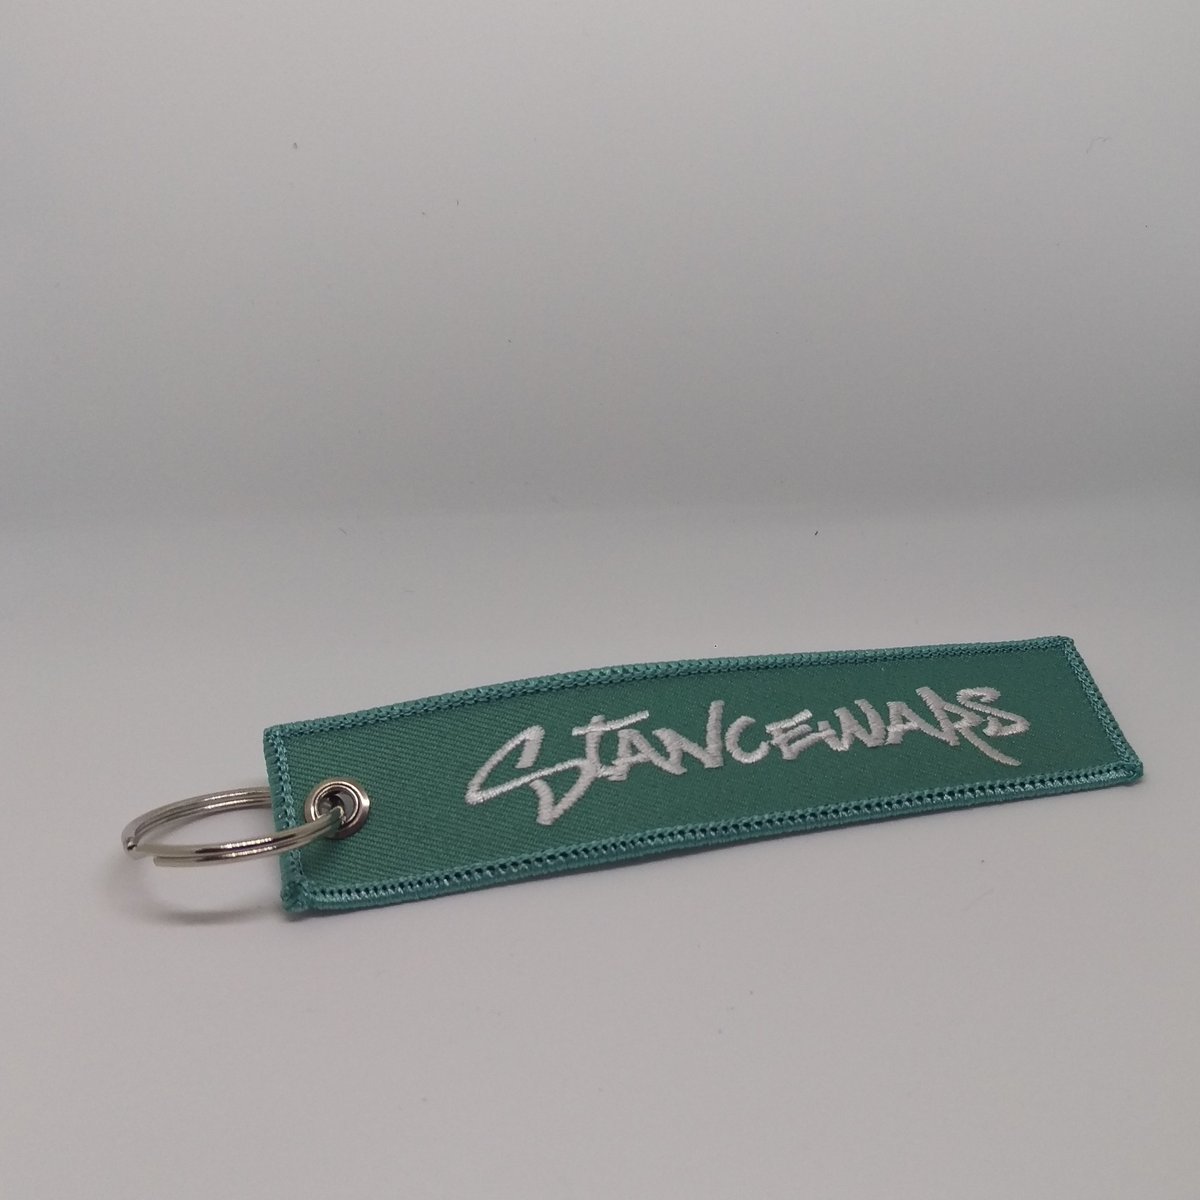 Image of Teal - Remove Before Flight Tag